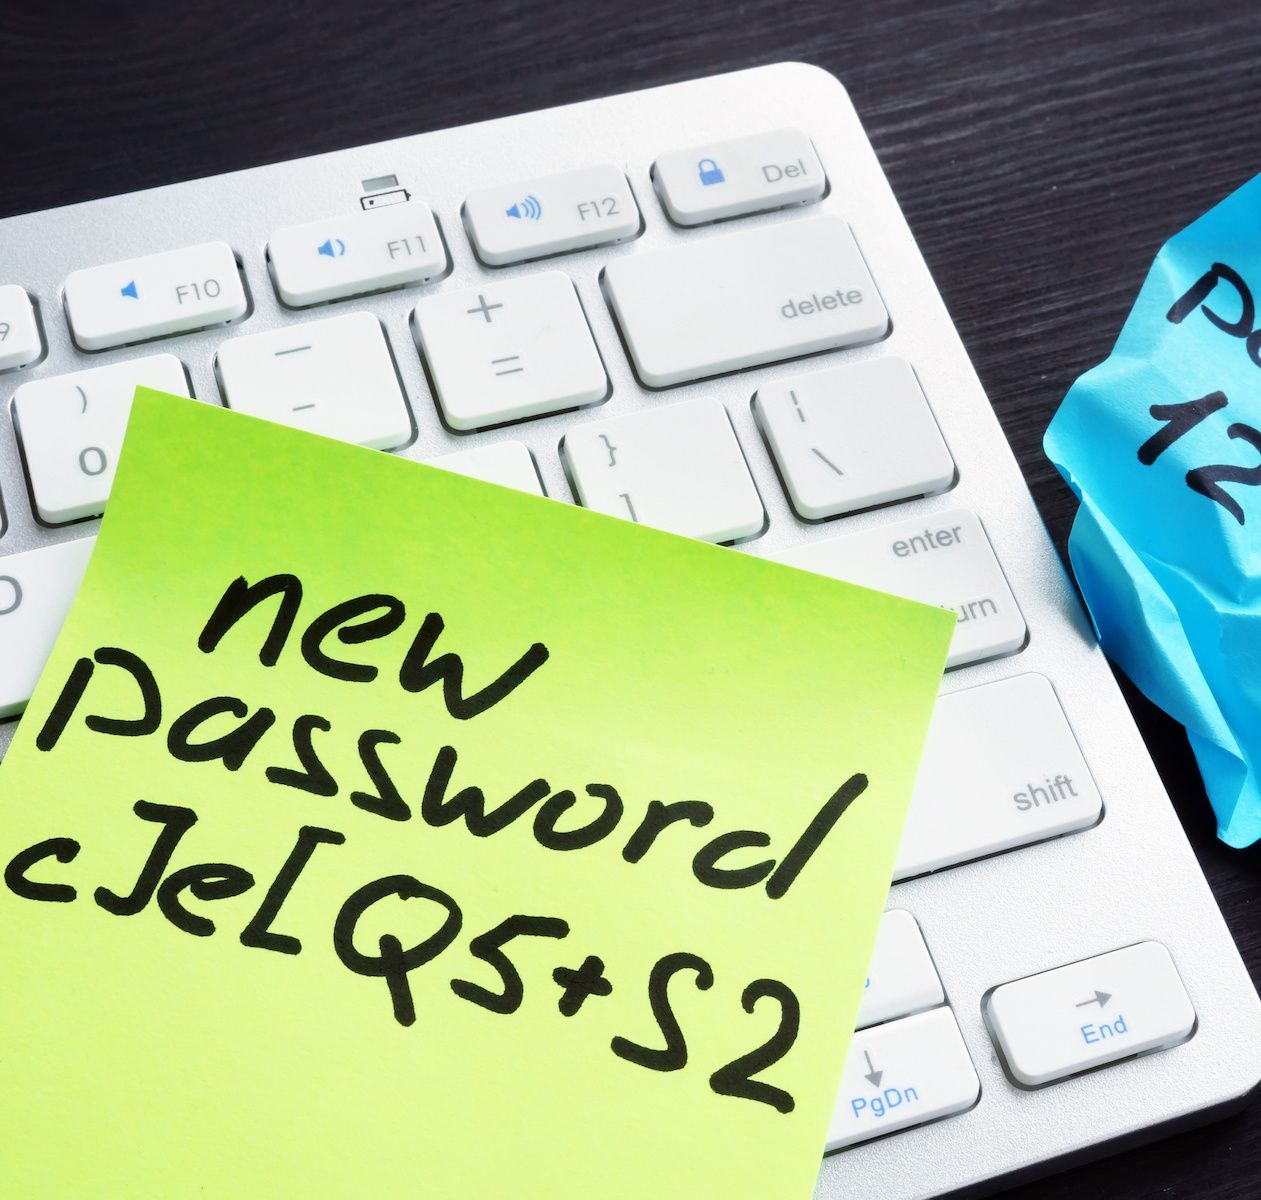 A strong password written on a yellow Post-it note sitting on top of an Apple keyboard.